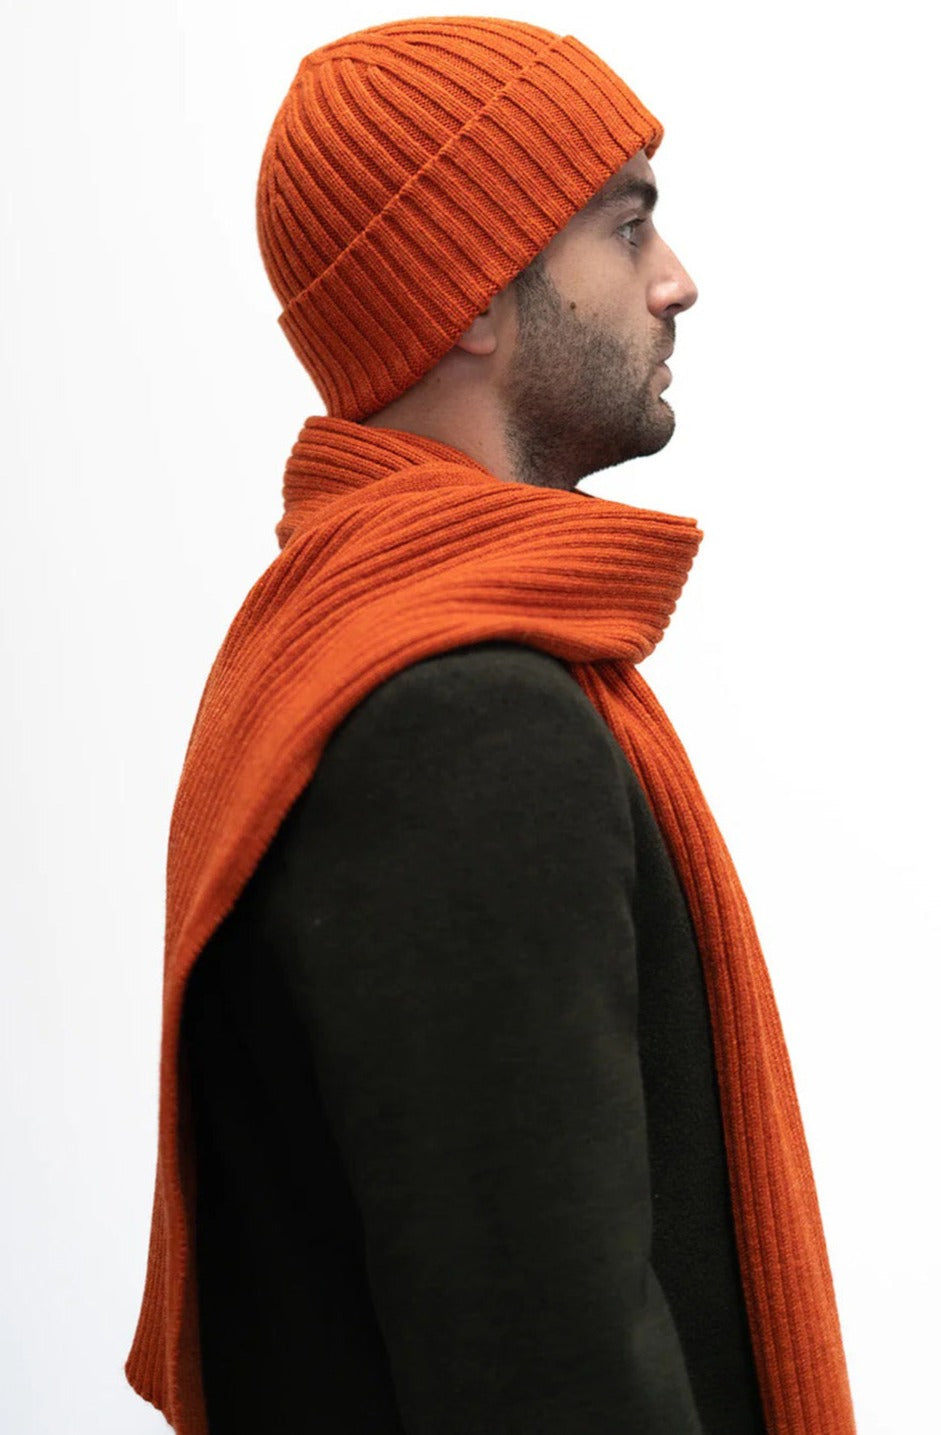 Jacquard ribbed scarf knitted in Ayrshire in sumptuously soft lambswool by Hilary Jane Keyes. In shade Furnace - deep orange